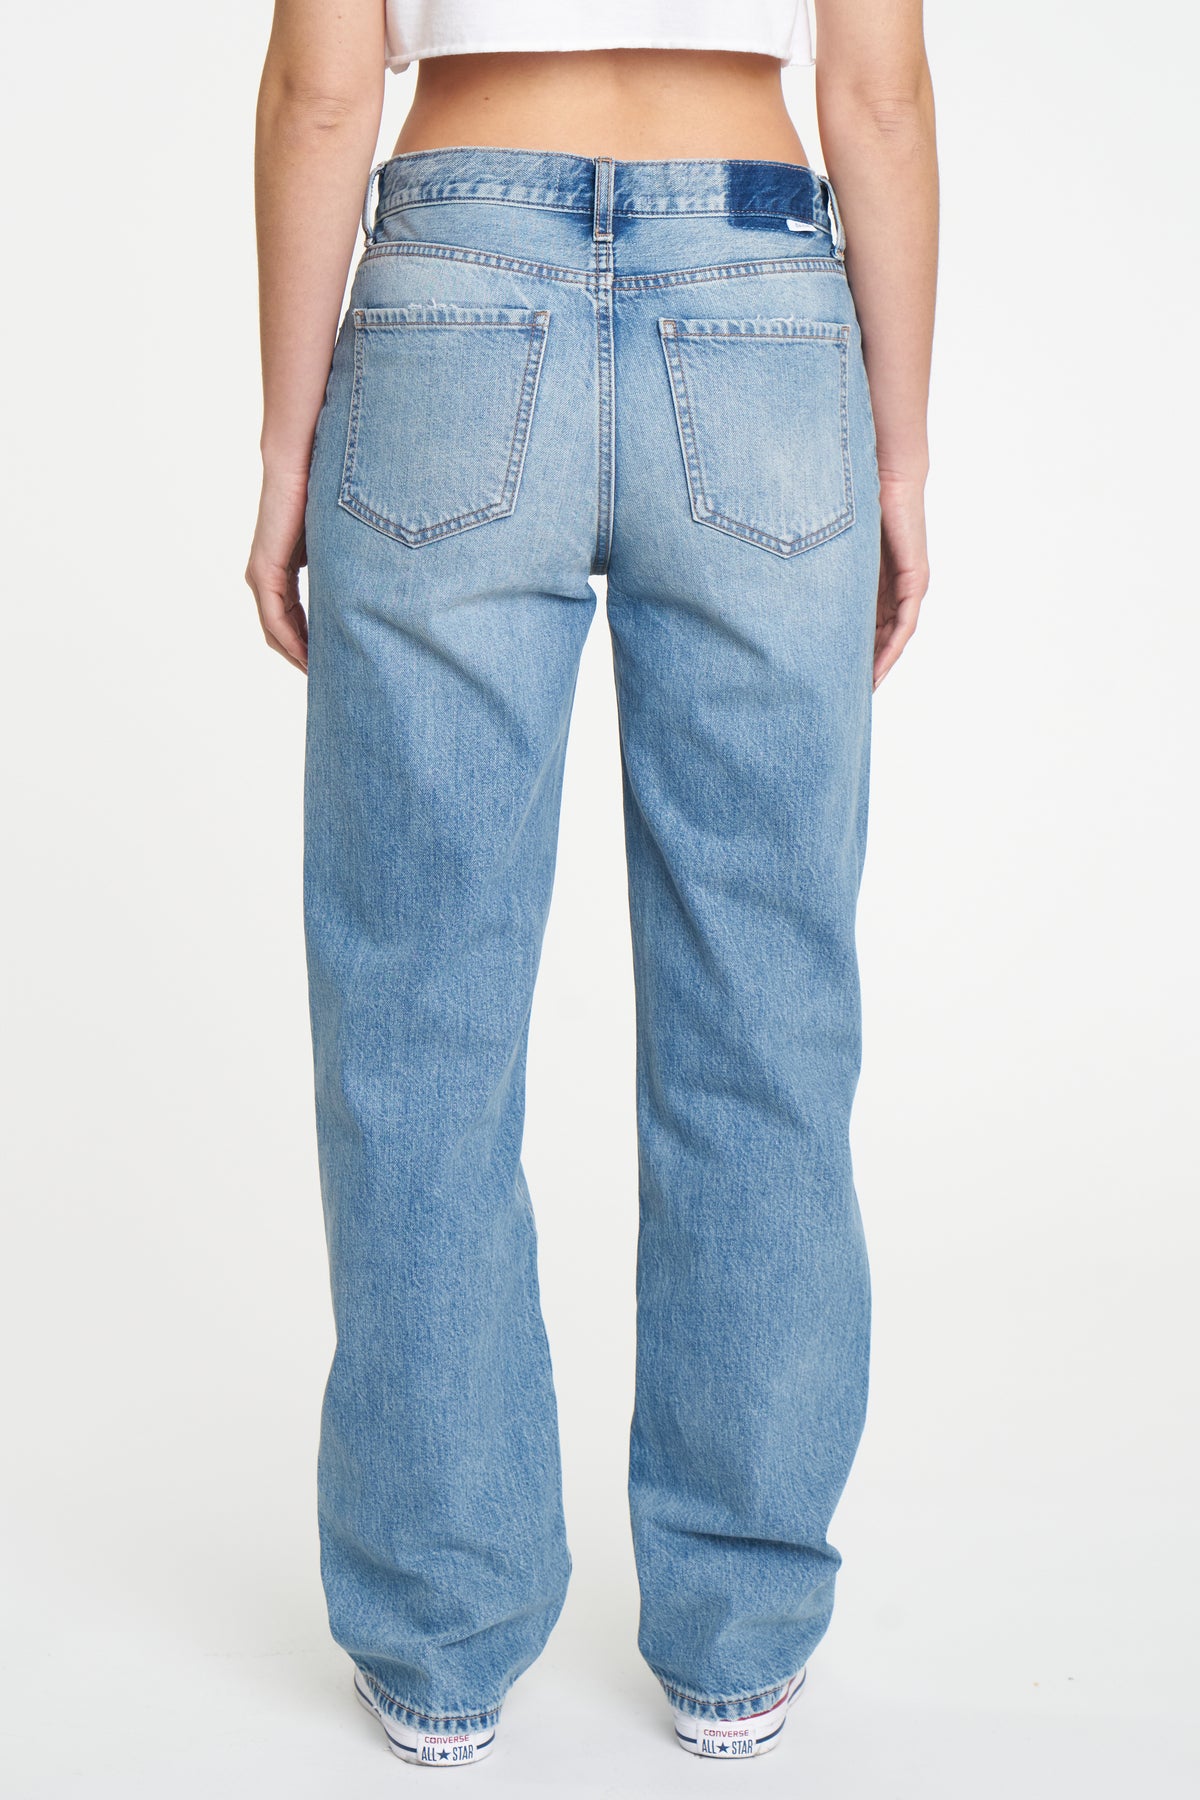 1999 Jeans Slouch 90s Fit in Keeper